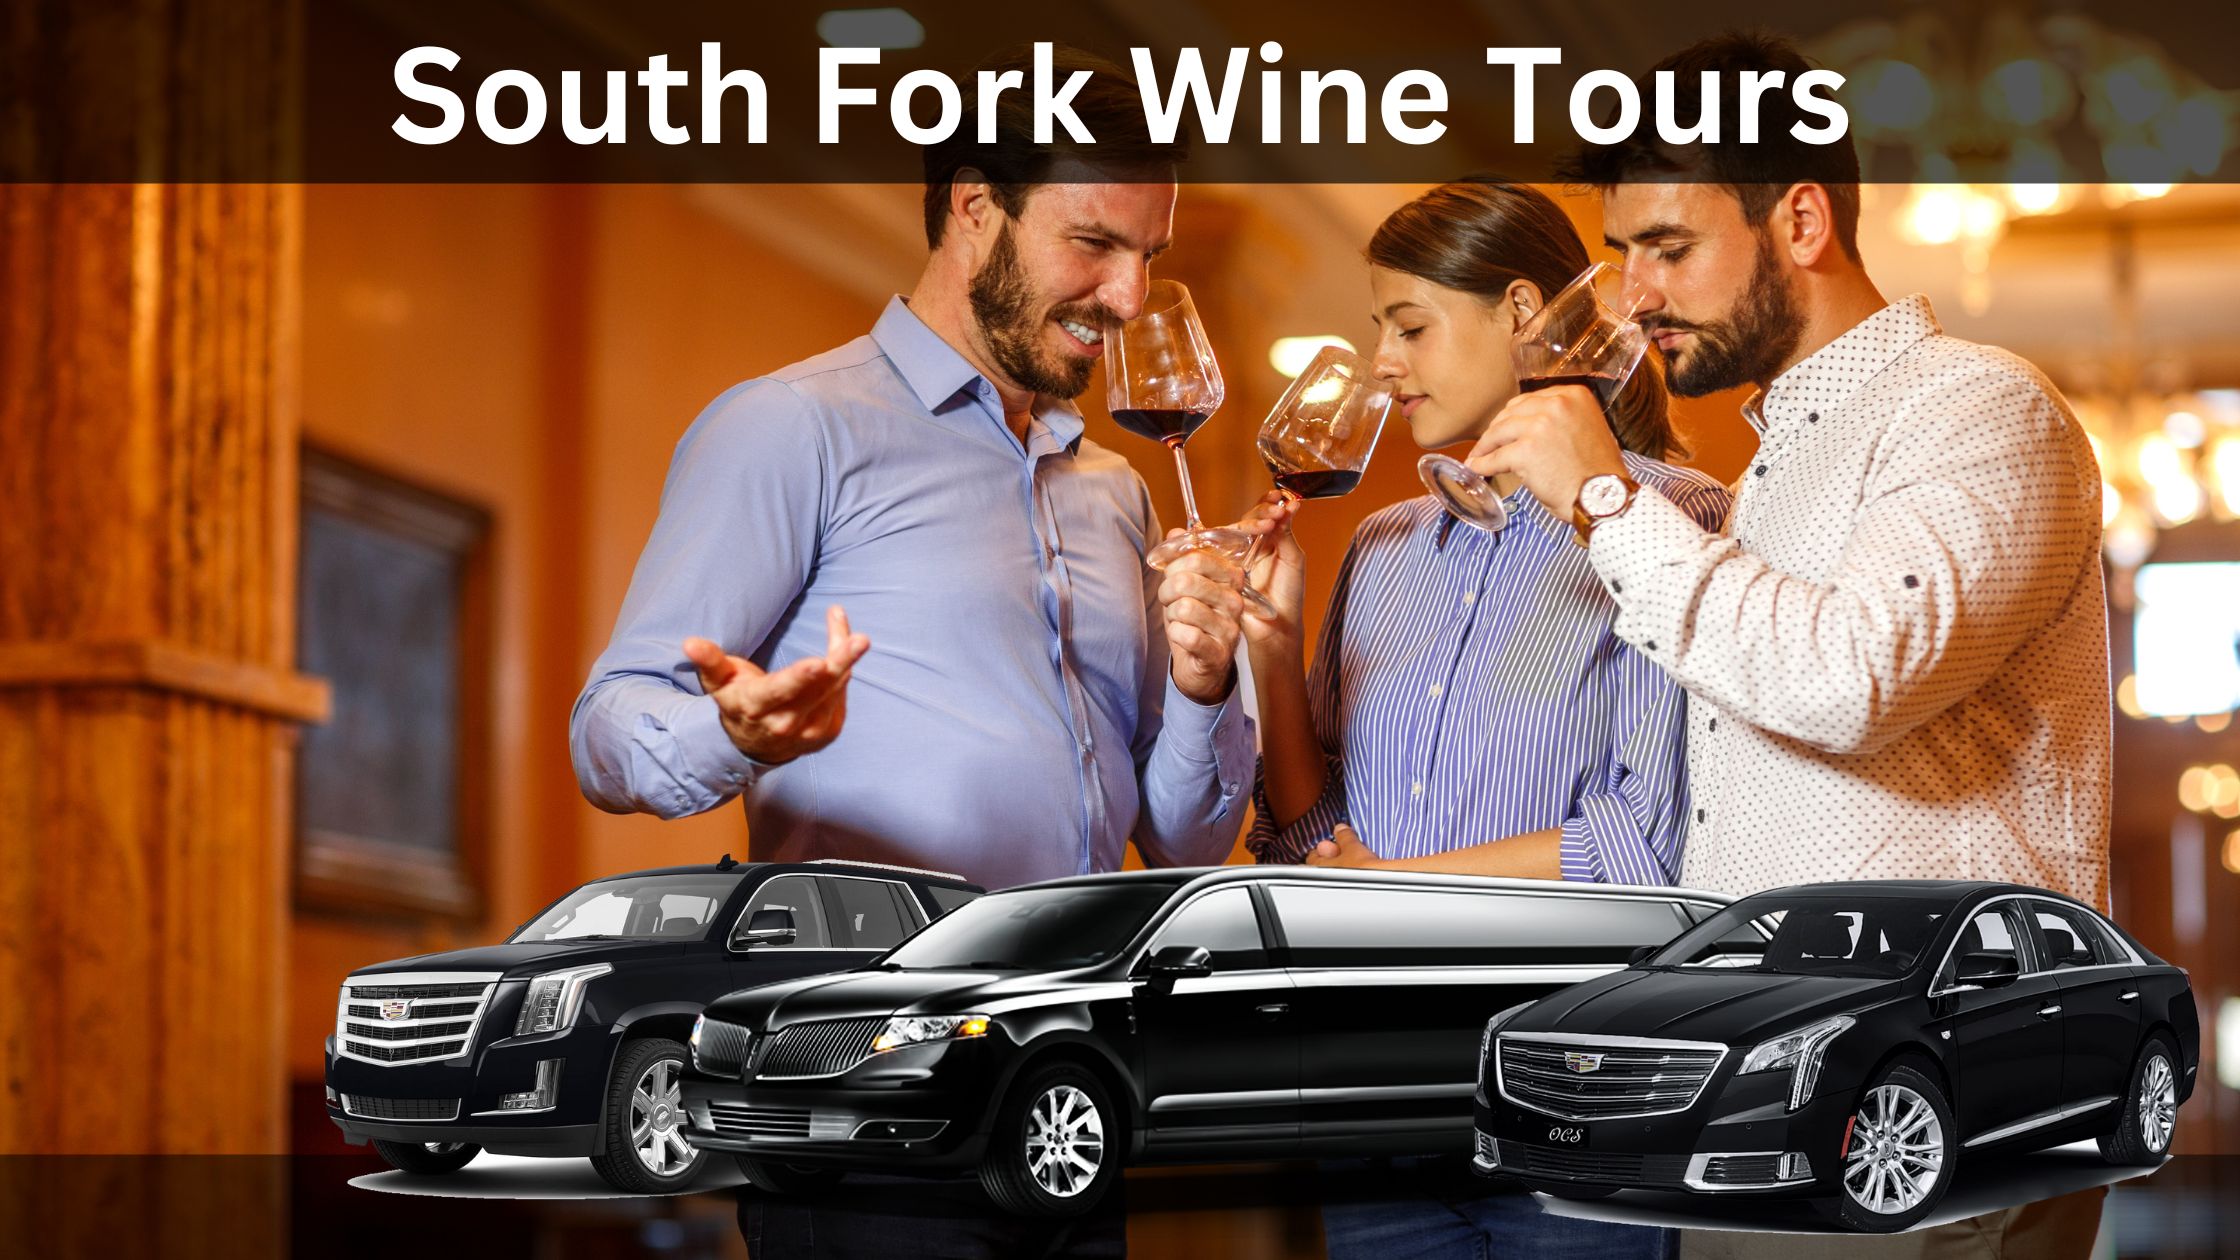 South Fork Wine Tours